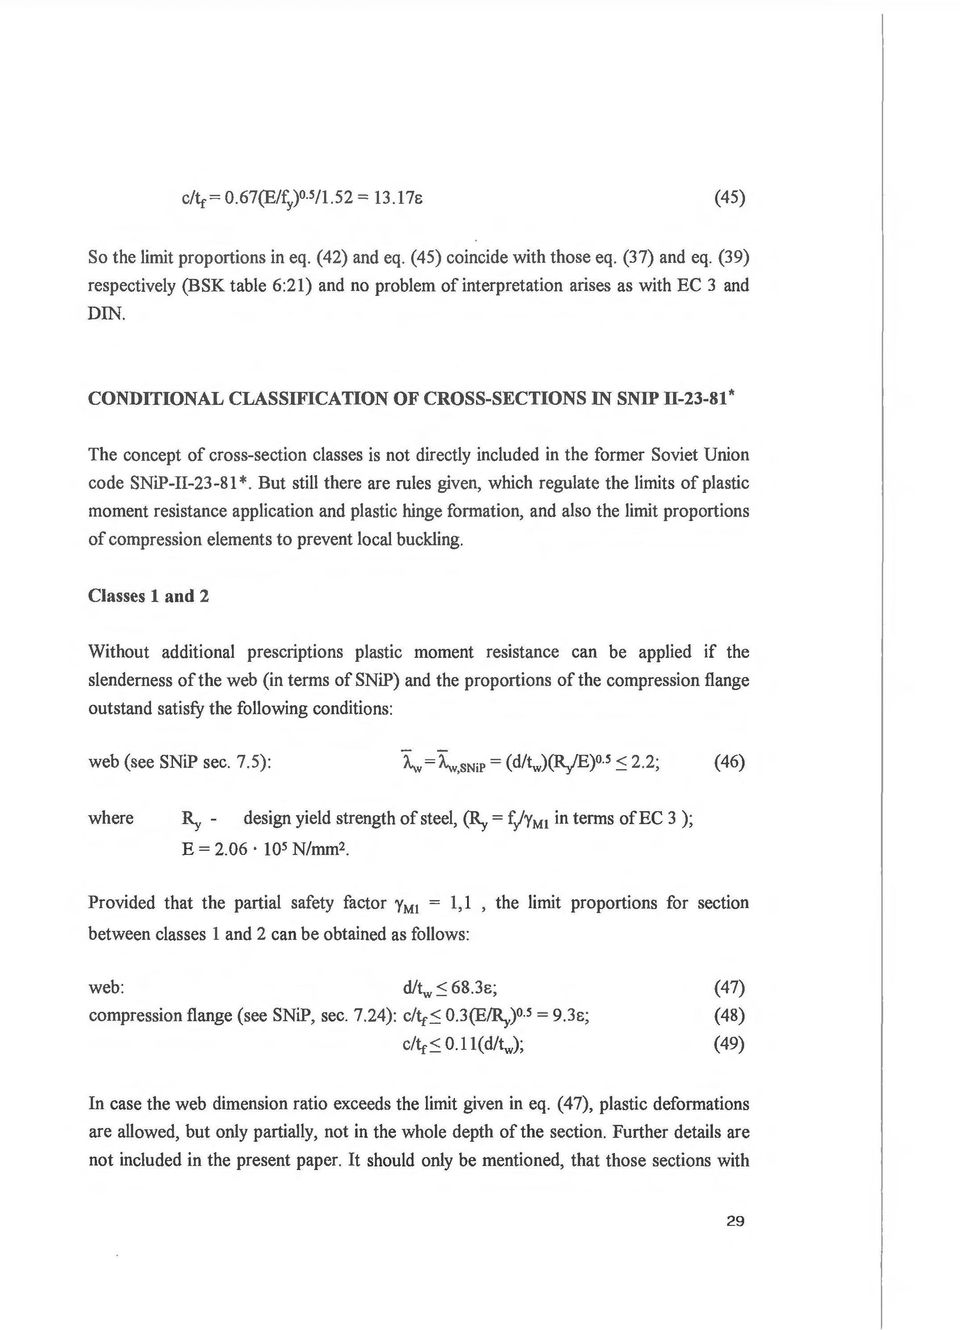 CONDITIONAL CLASSIFICATION OF CROSS-SECTIONS IN SNIP ll-23-81 * The concept of cross-section classes is not directly included in the former Soviet Union code SNiP-II-23-81 *.